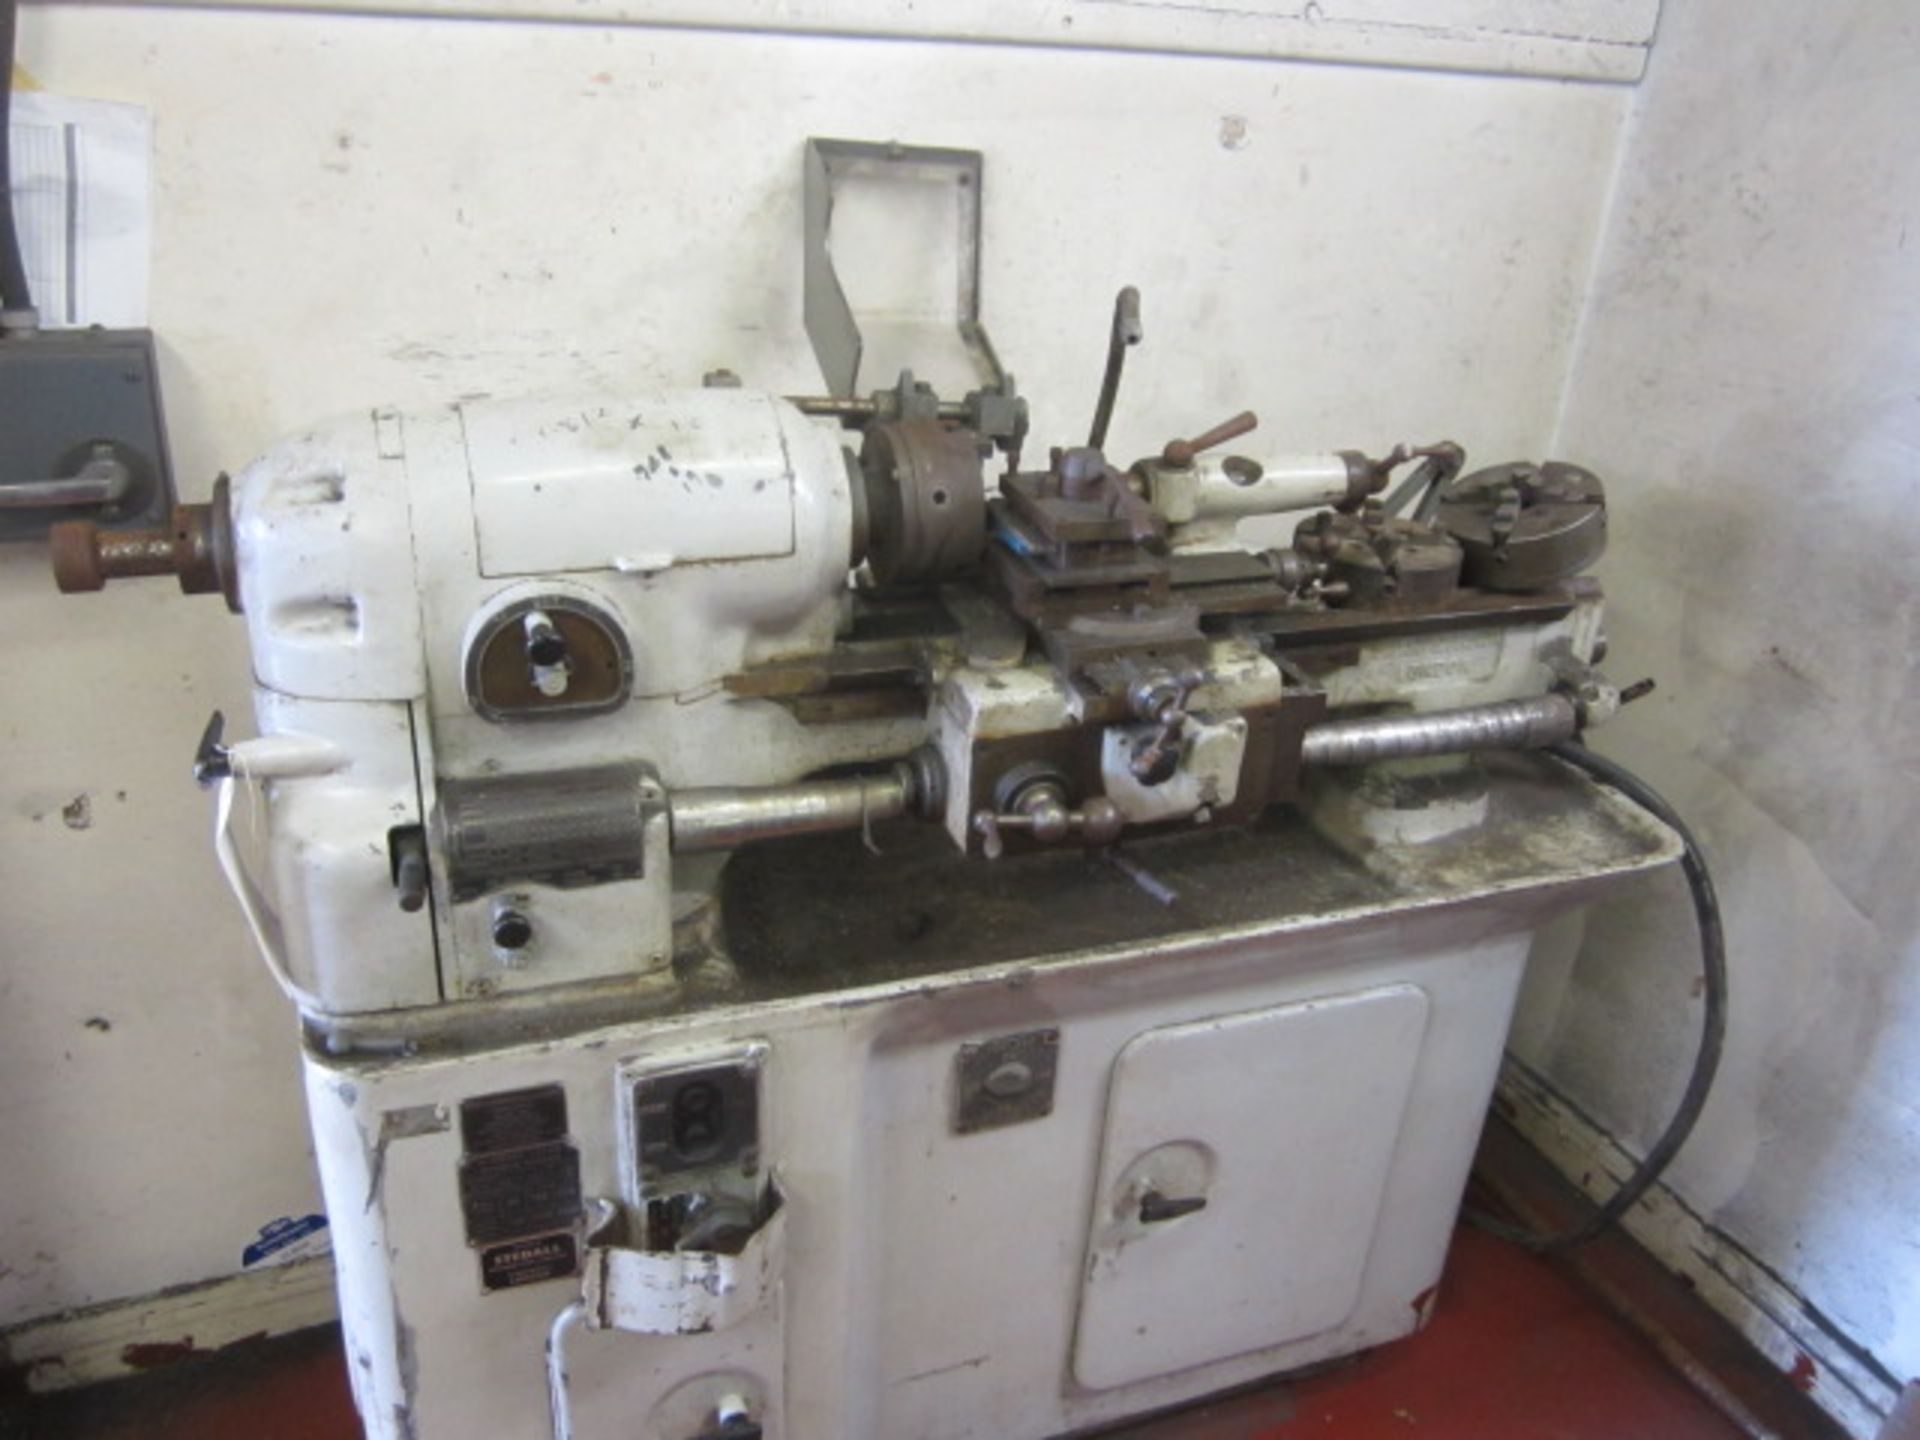 Smart & Brown M model lathe, 1 x 3 jaw and 2 x 4 jaw chucks, and quick change tool post. A work